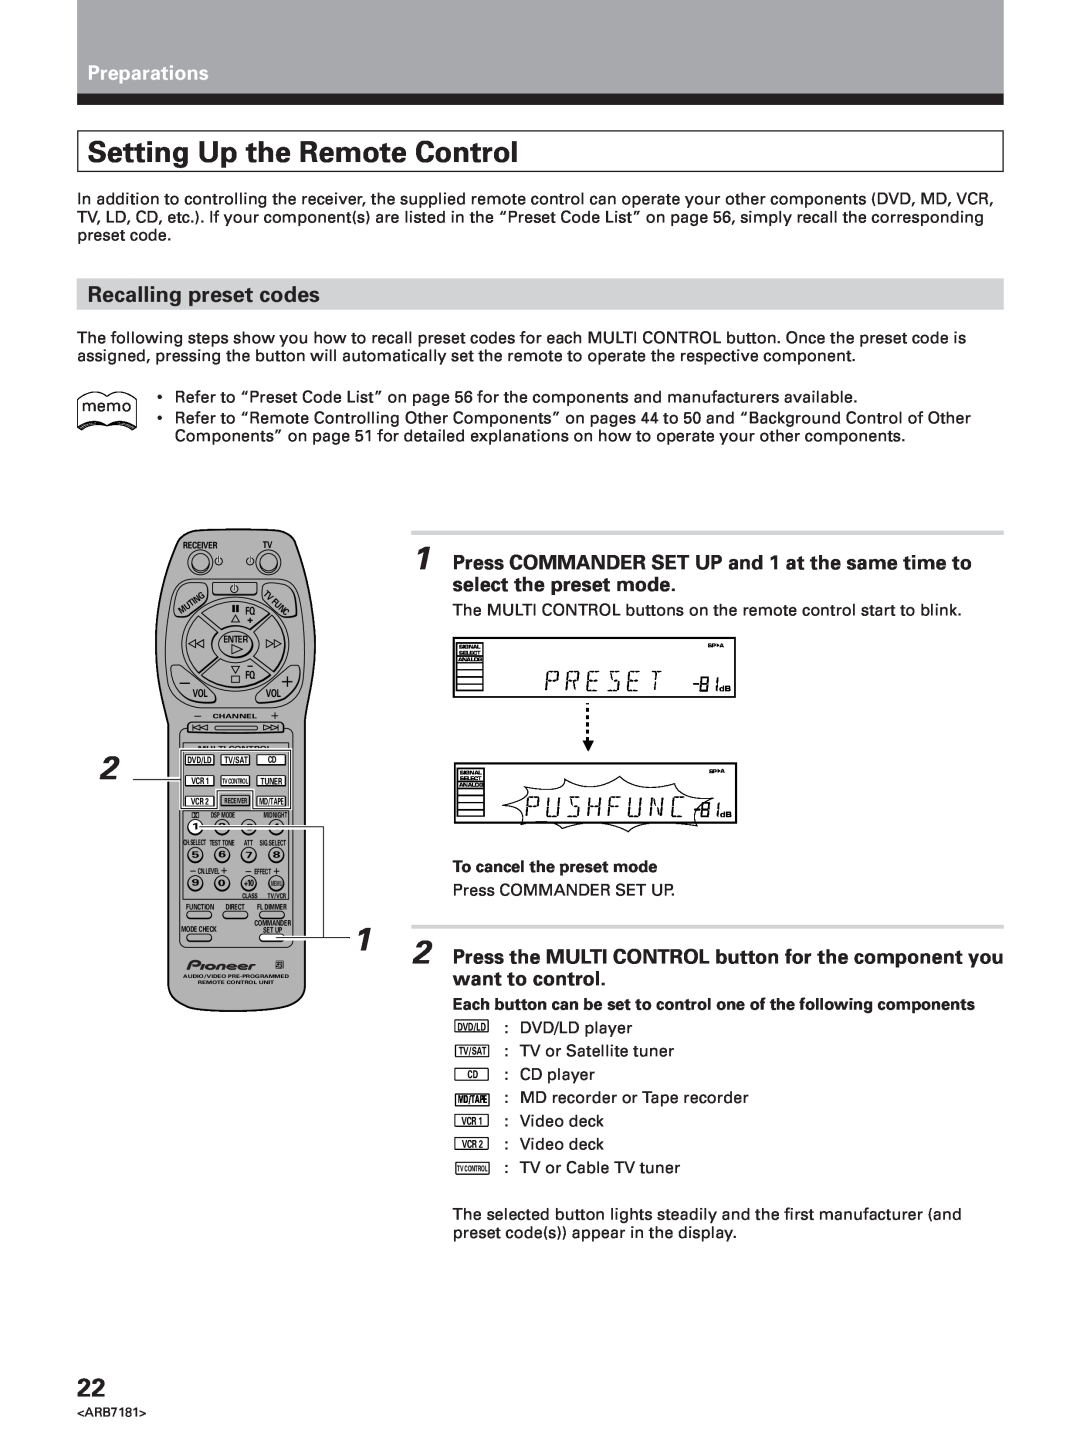 Pioneer VSX-21 manual Setting Up the Remote Control, Recalling preset codes, Preparations 